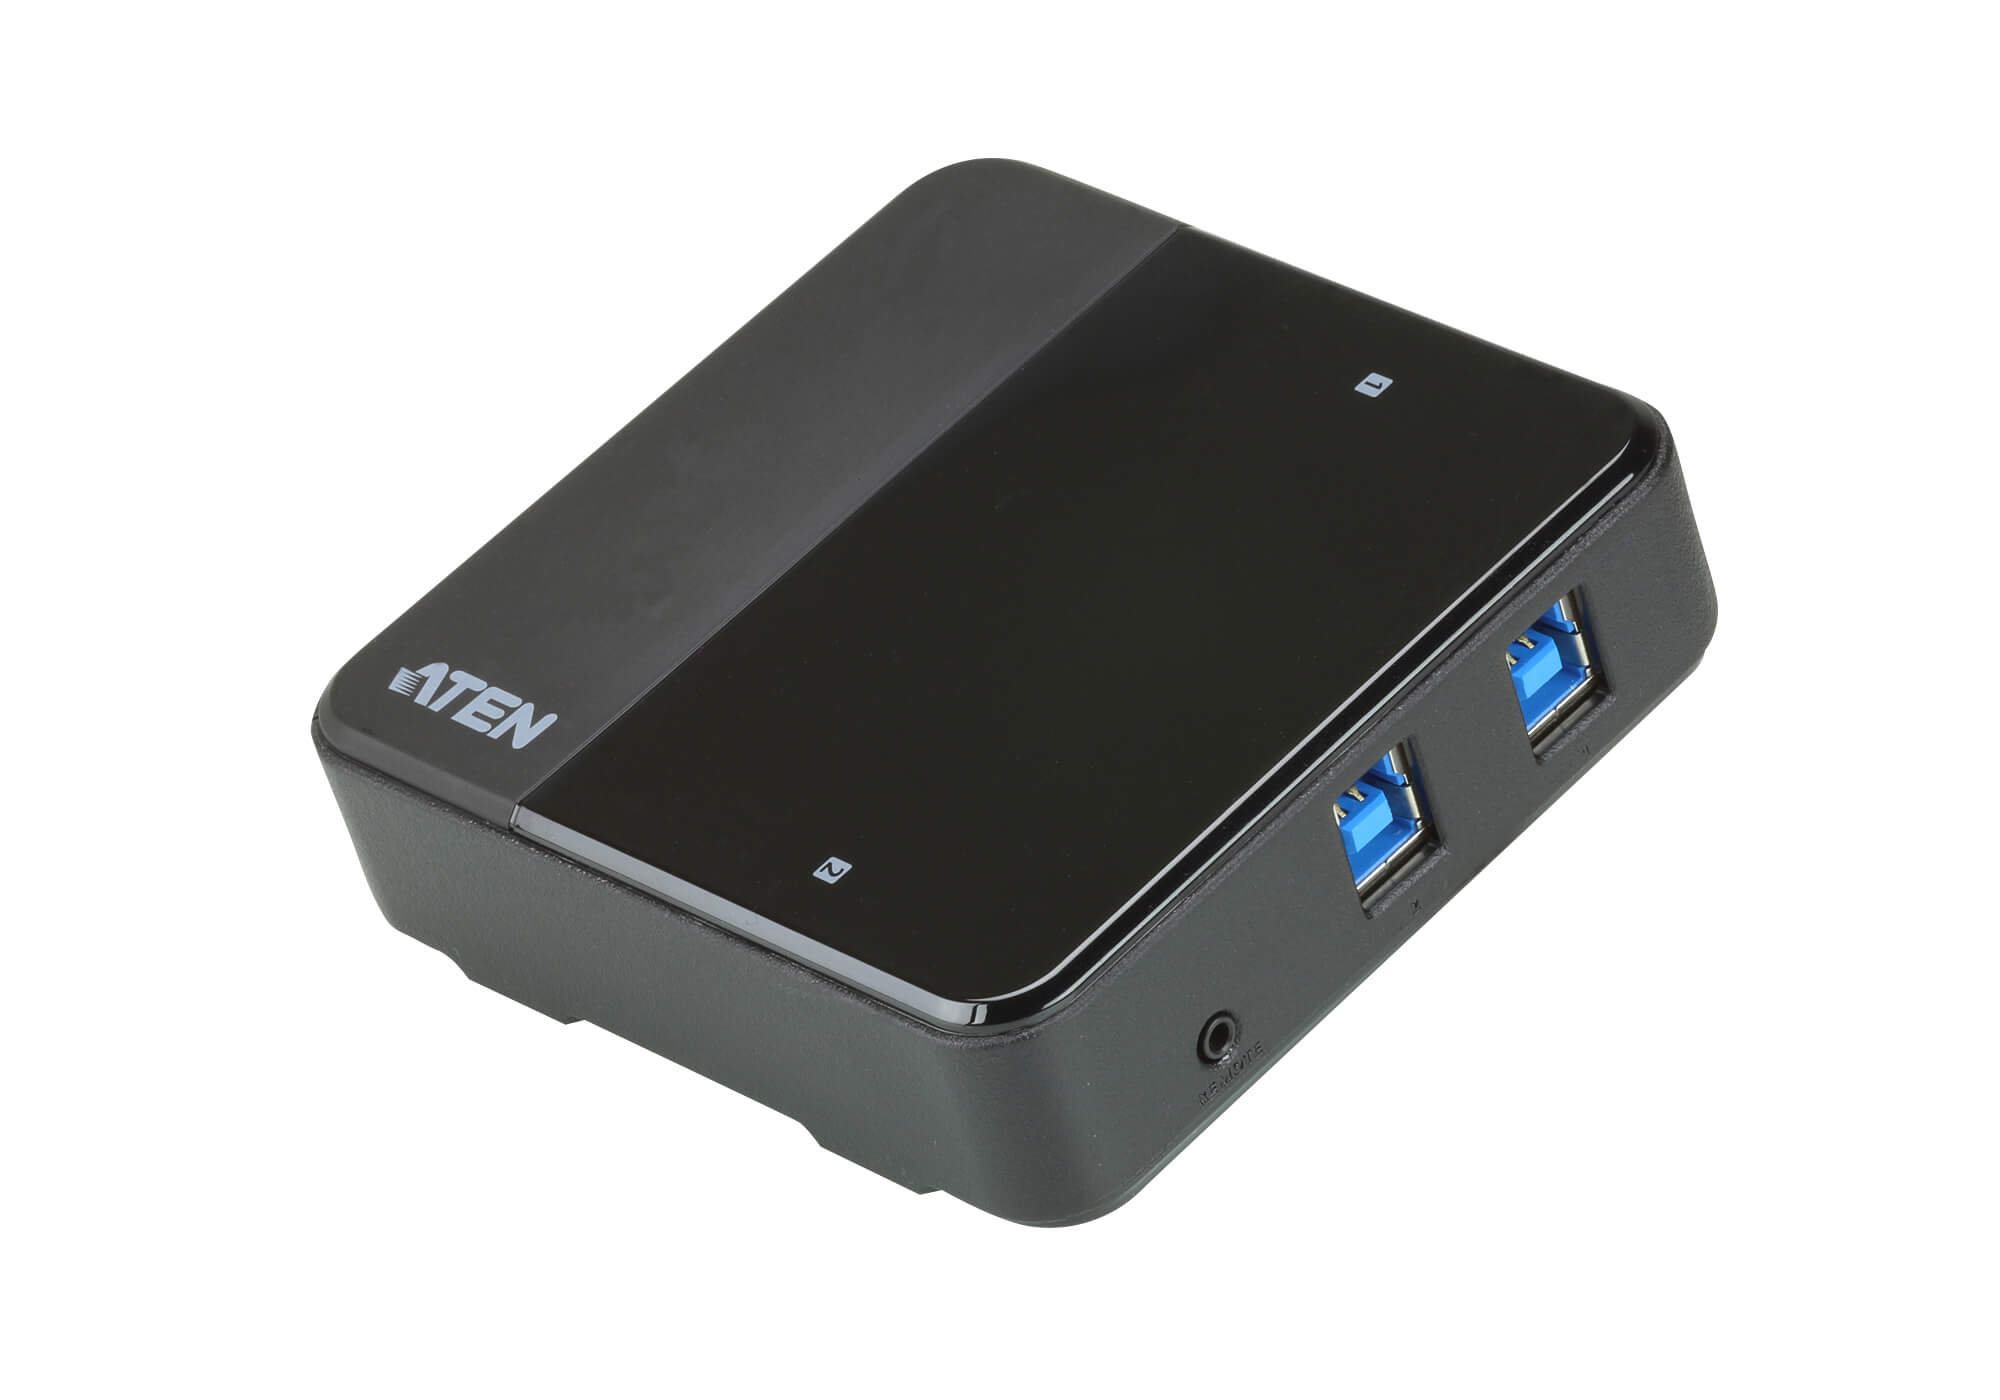 Aten Peripheral Switch 2x4 USB 3.1 Gen1, 2x PC, 4x USB 3.1 Gen1 Ports, Remote Port Selector, Plug and Play-0